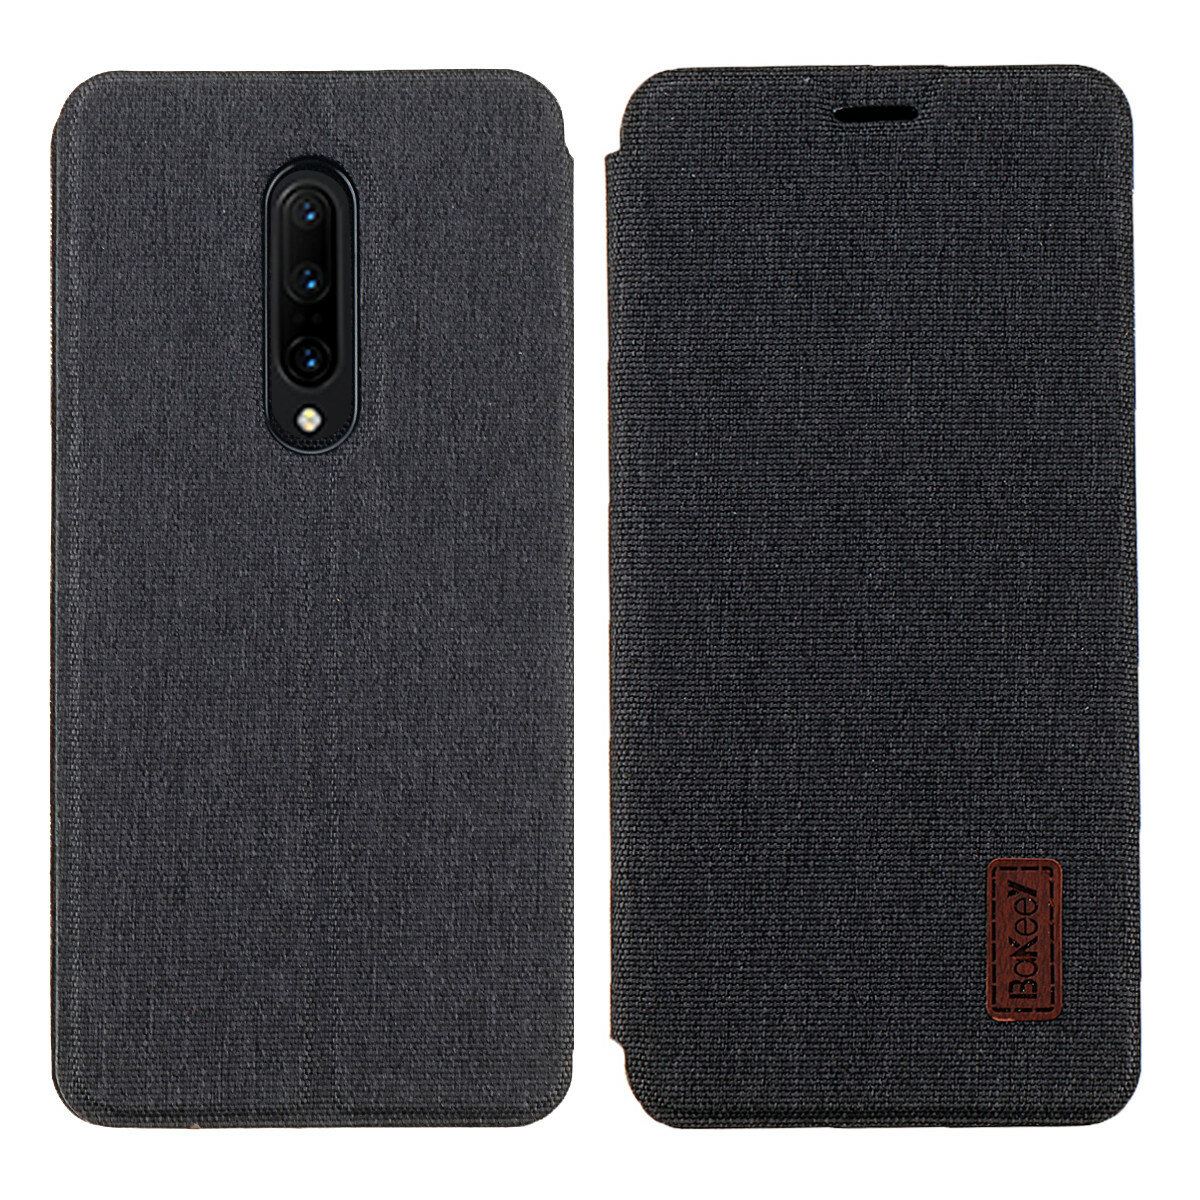 Bakeey Flip Shockproof Fabric Soft Silicone Edge Full Body Protective Case For OnePlus 7 PRO